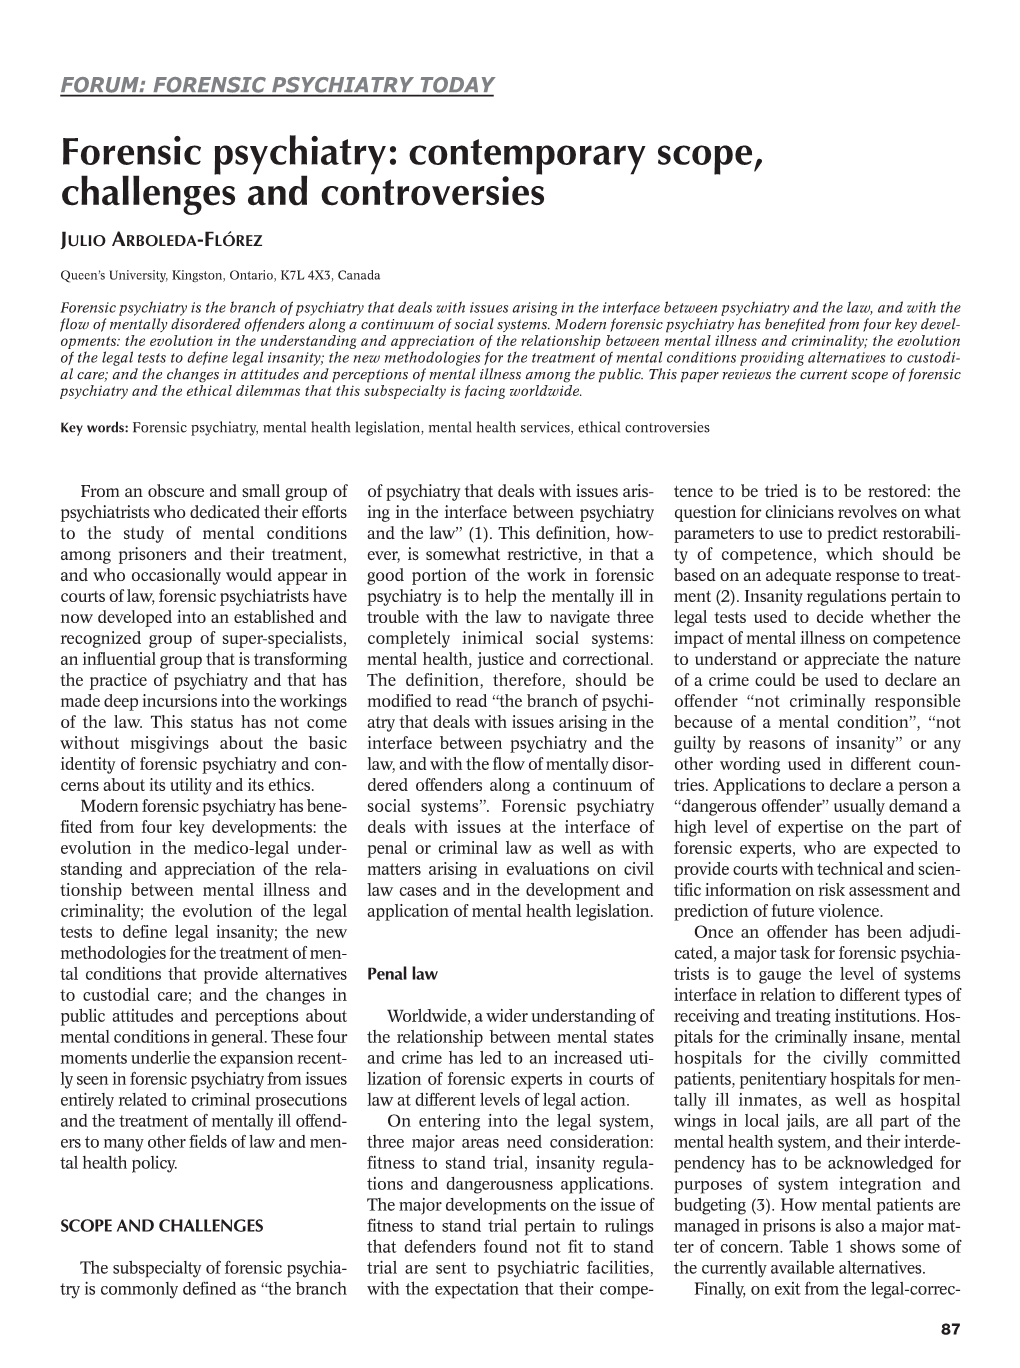 Forensic Psychiatry: Contemporary Scope, Challenges and Controversies